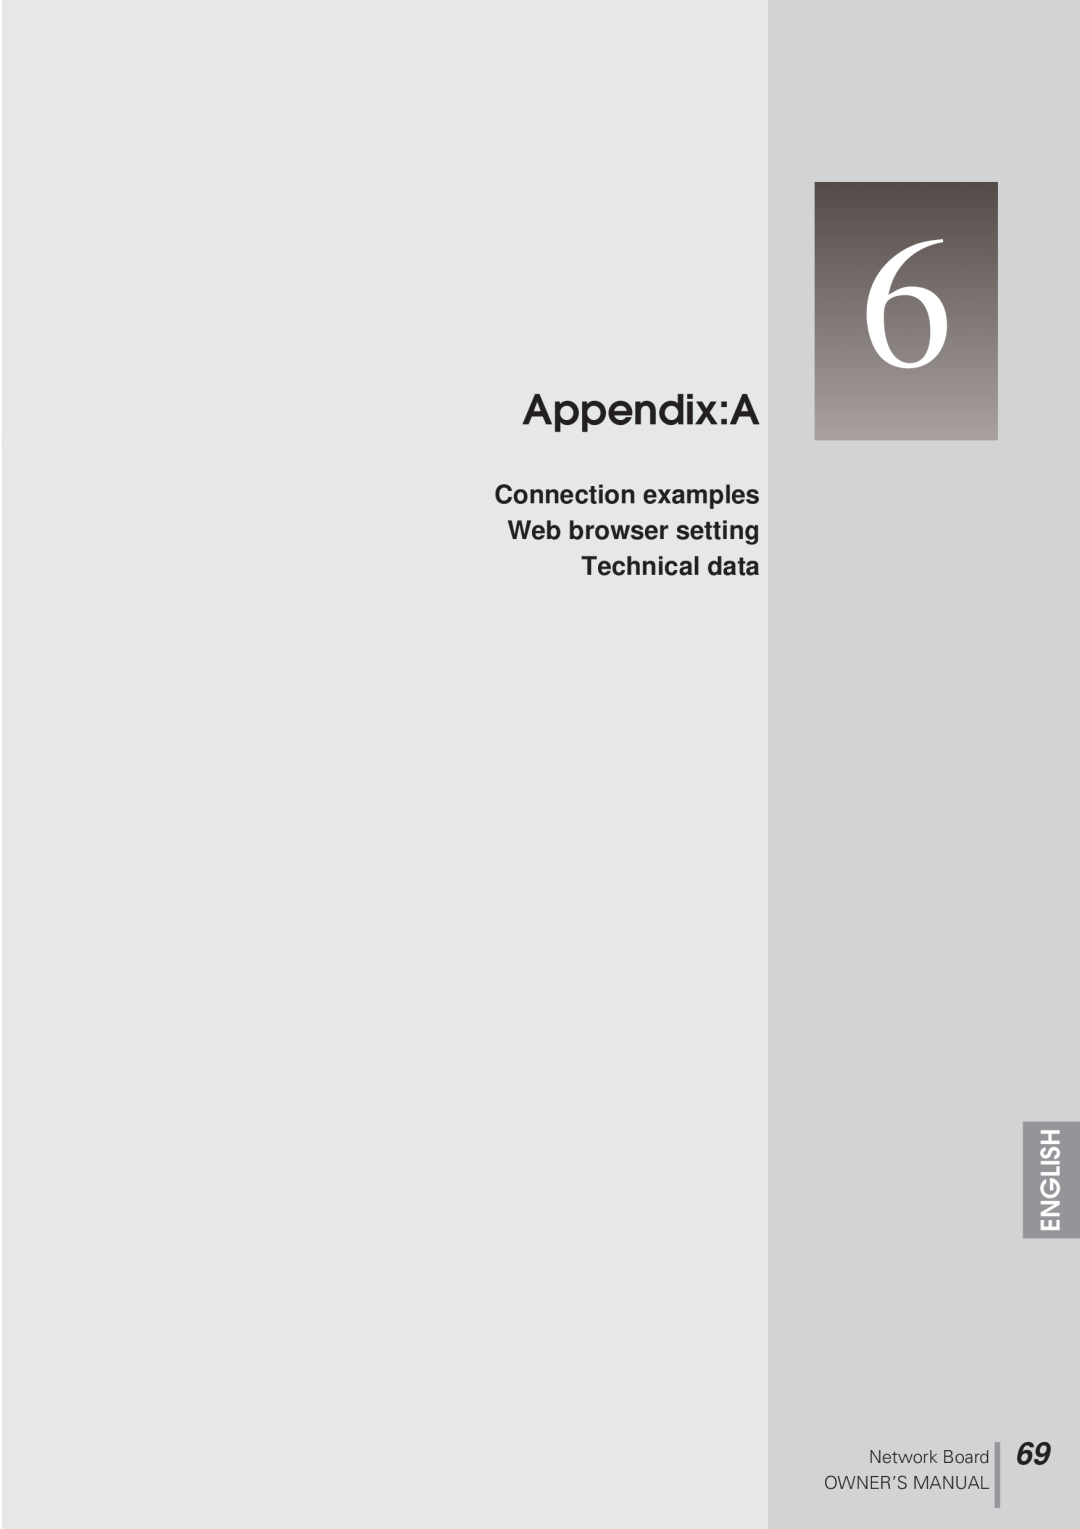 Eiki MD13NET owner manual Appendix:A, Connection examples Web browser setting, Technical data, English 